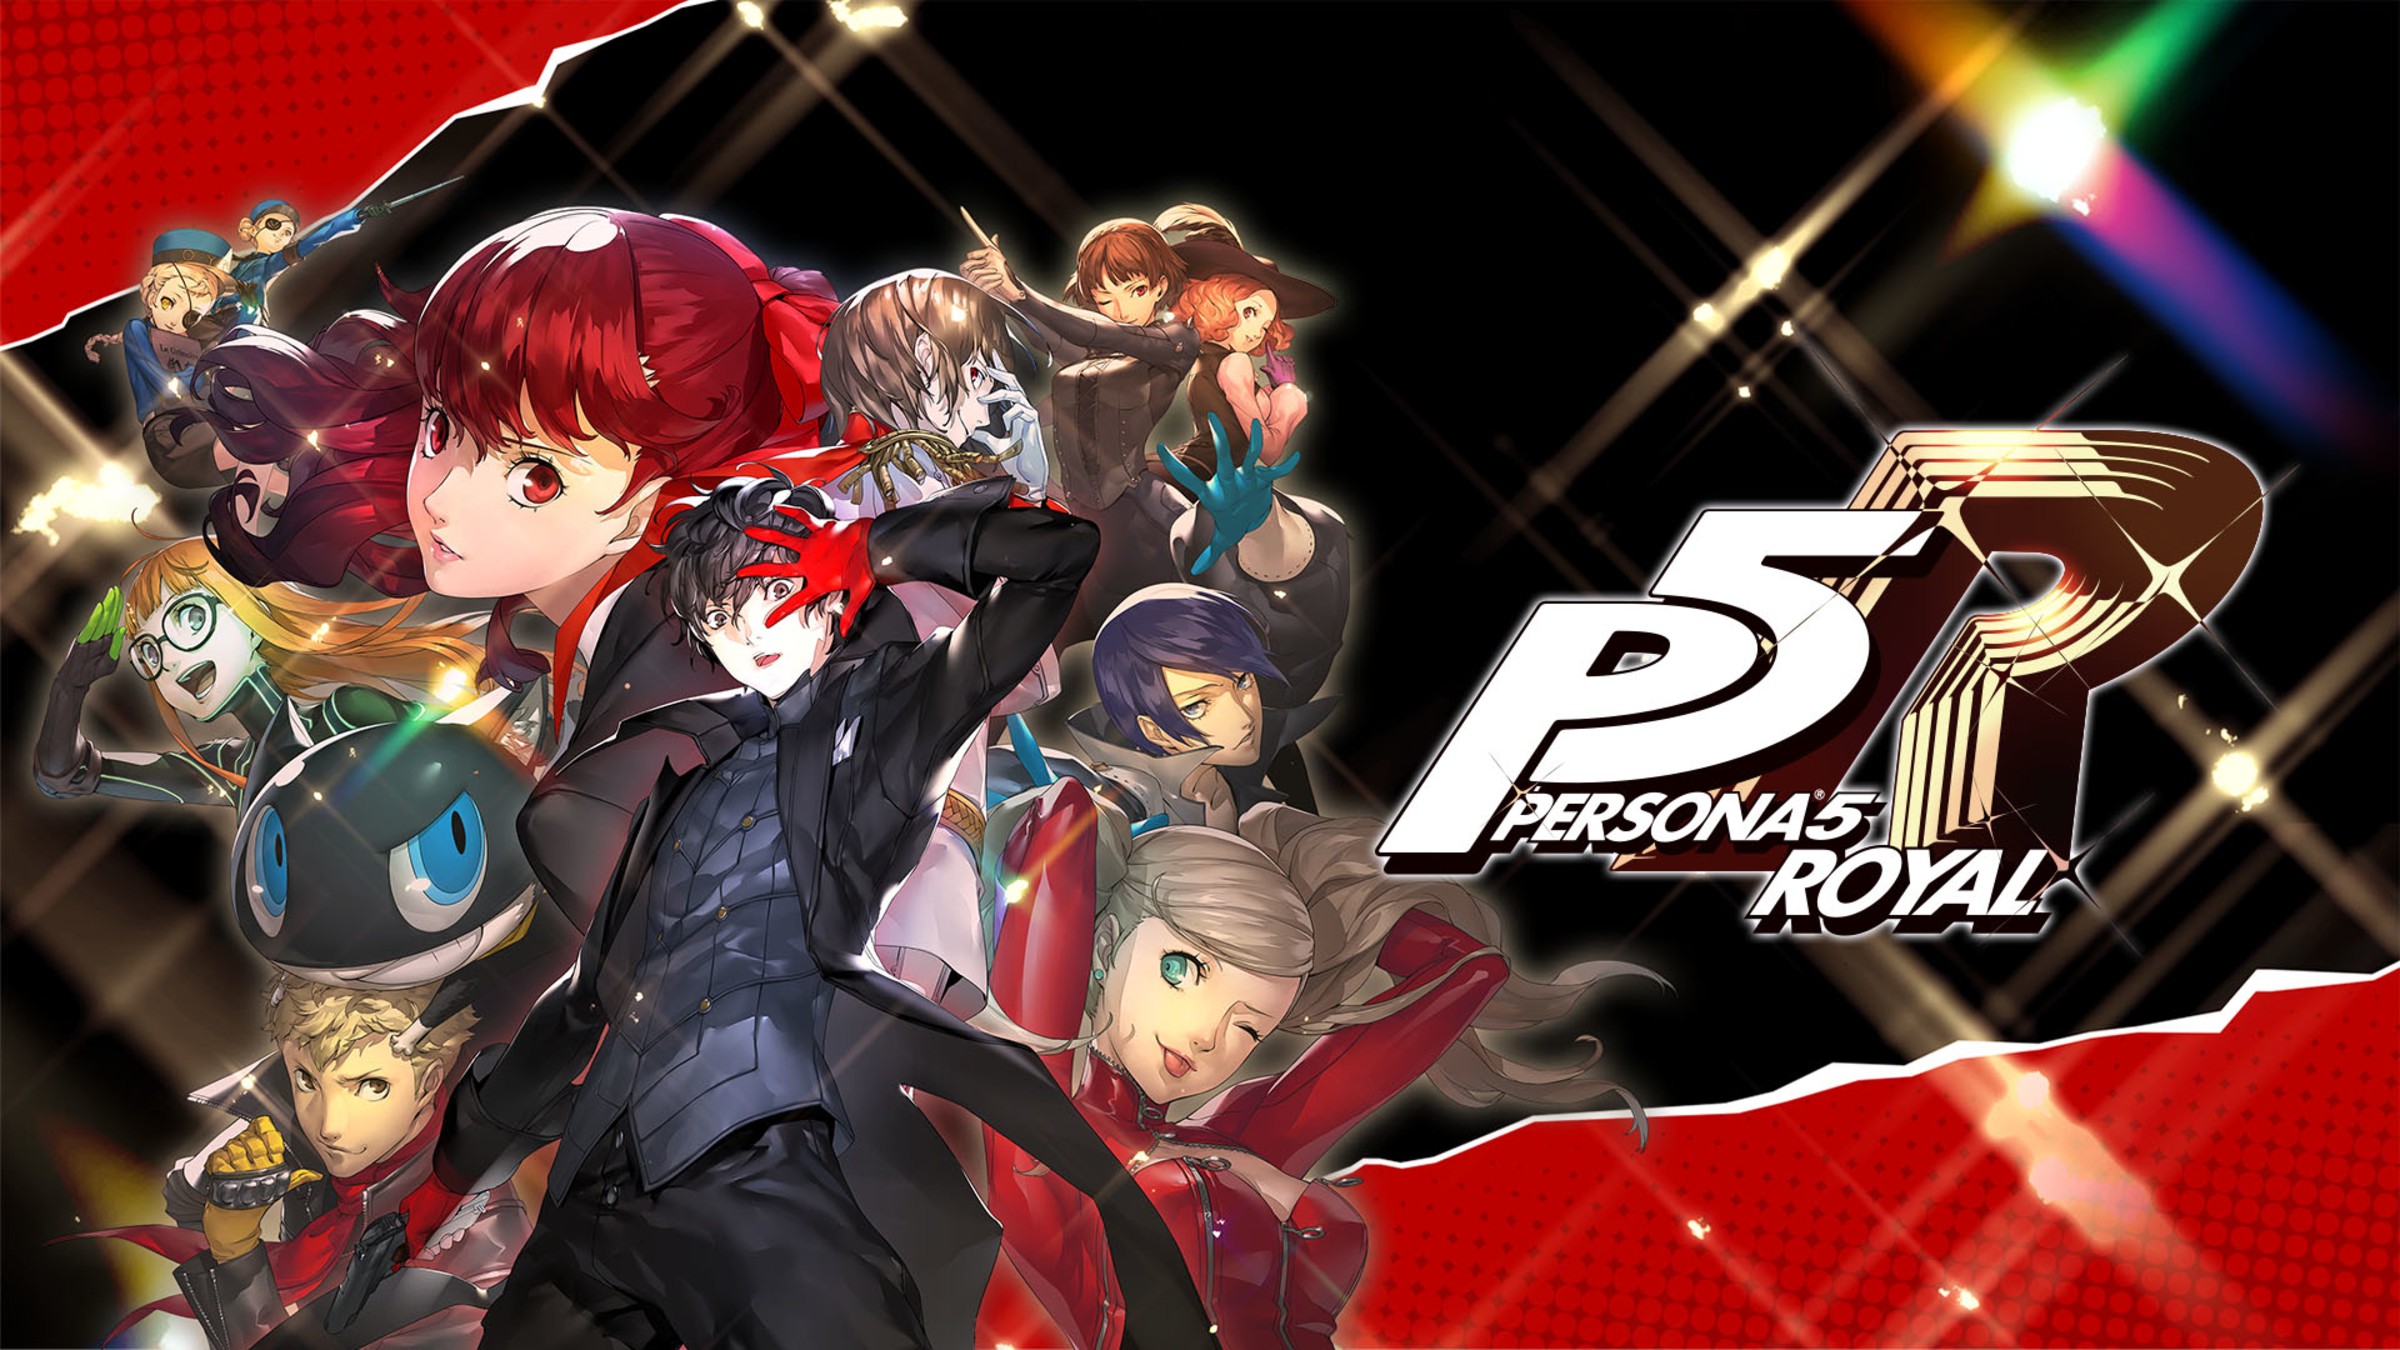 Persona 5 Royal for Nintendo Switch - Nintendo Official Site